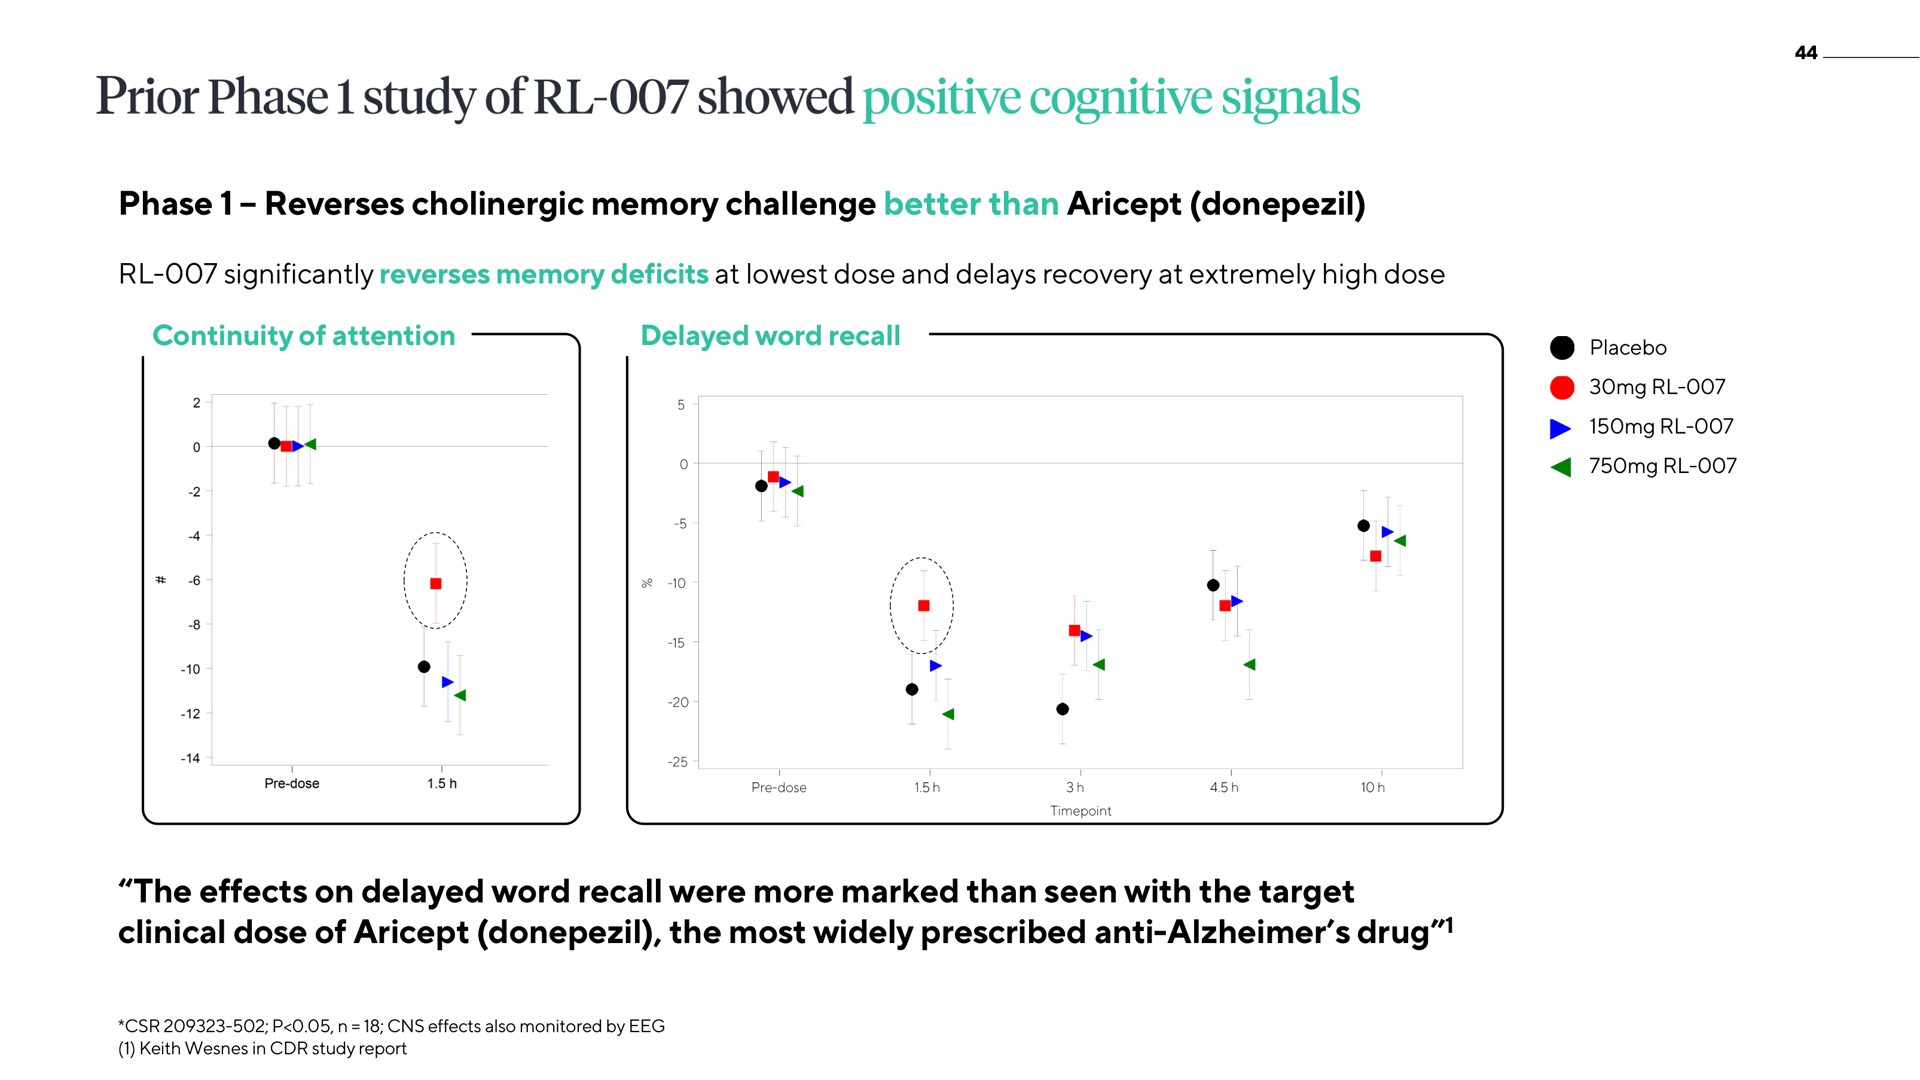 phase reverses cholinergic memory challenge better than significantly reverses memory deficits at dose and delays recovery at extremely high dose continuity of attention delayed word recall the effects on delayed word recall were more marked than seen with the target clinical dose of the most widely prescribed anti drug prior study showed positive cognitive signals | ATAI